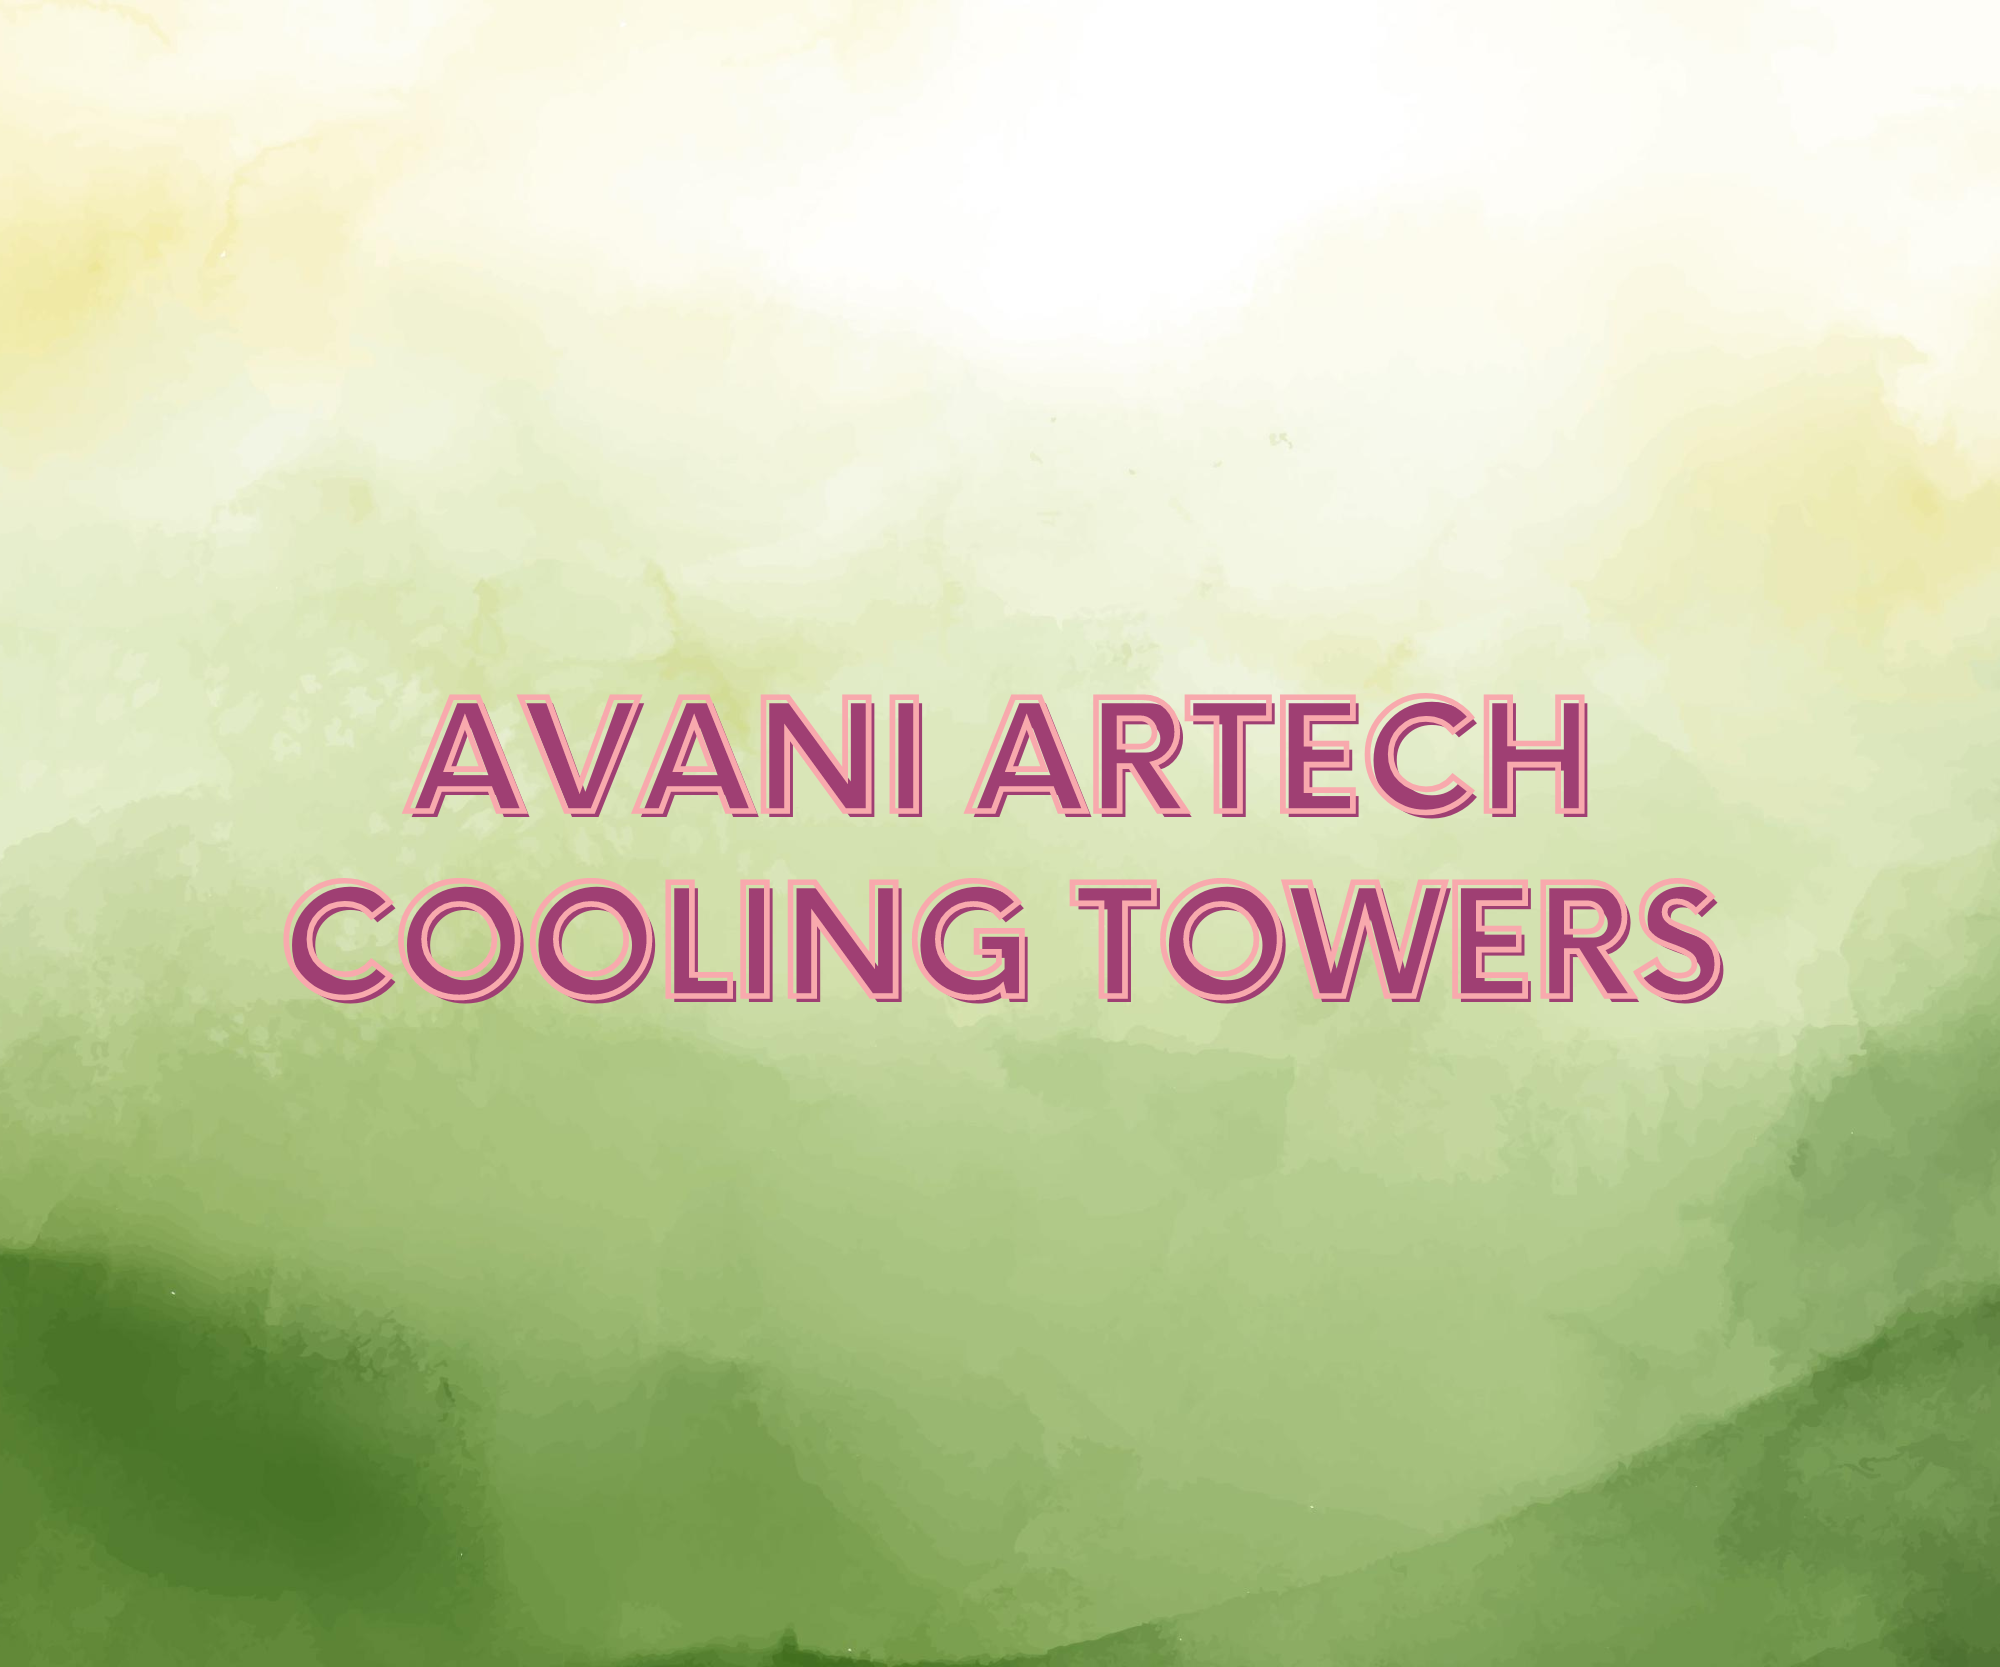 Avani Artech Cooling Towers 